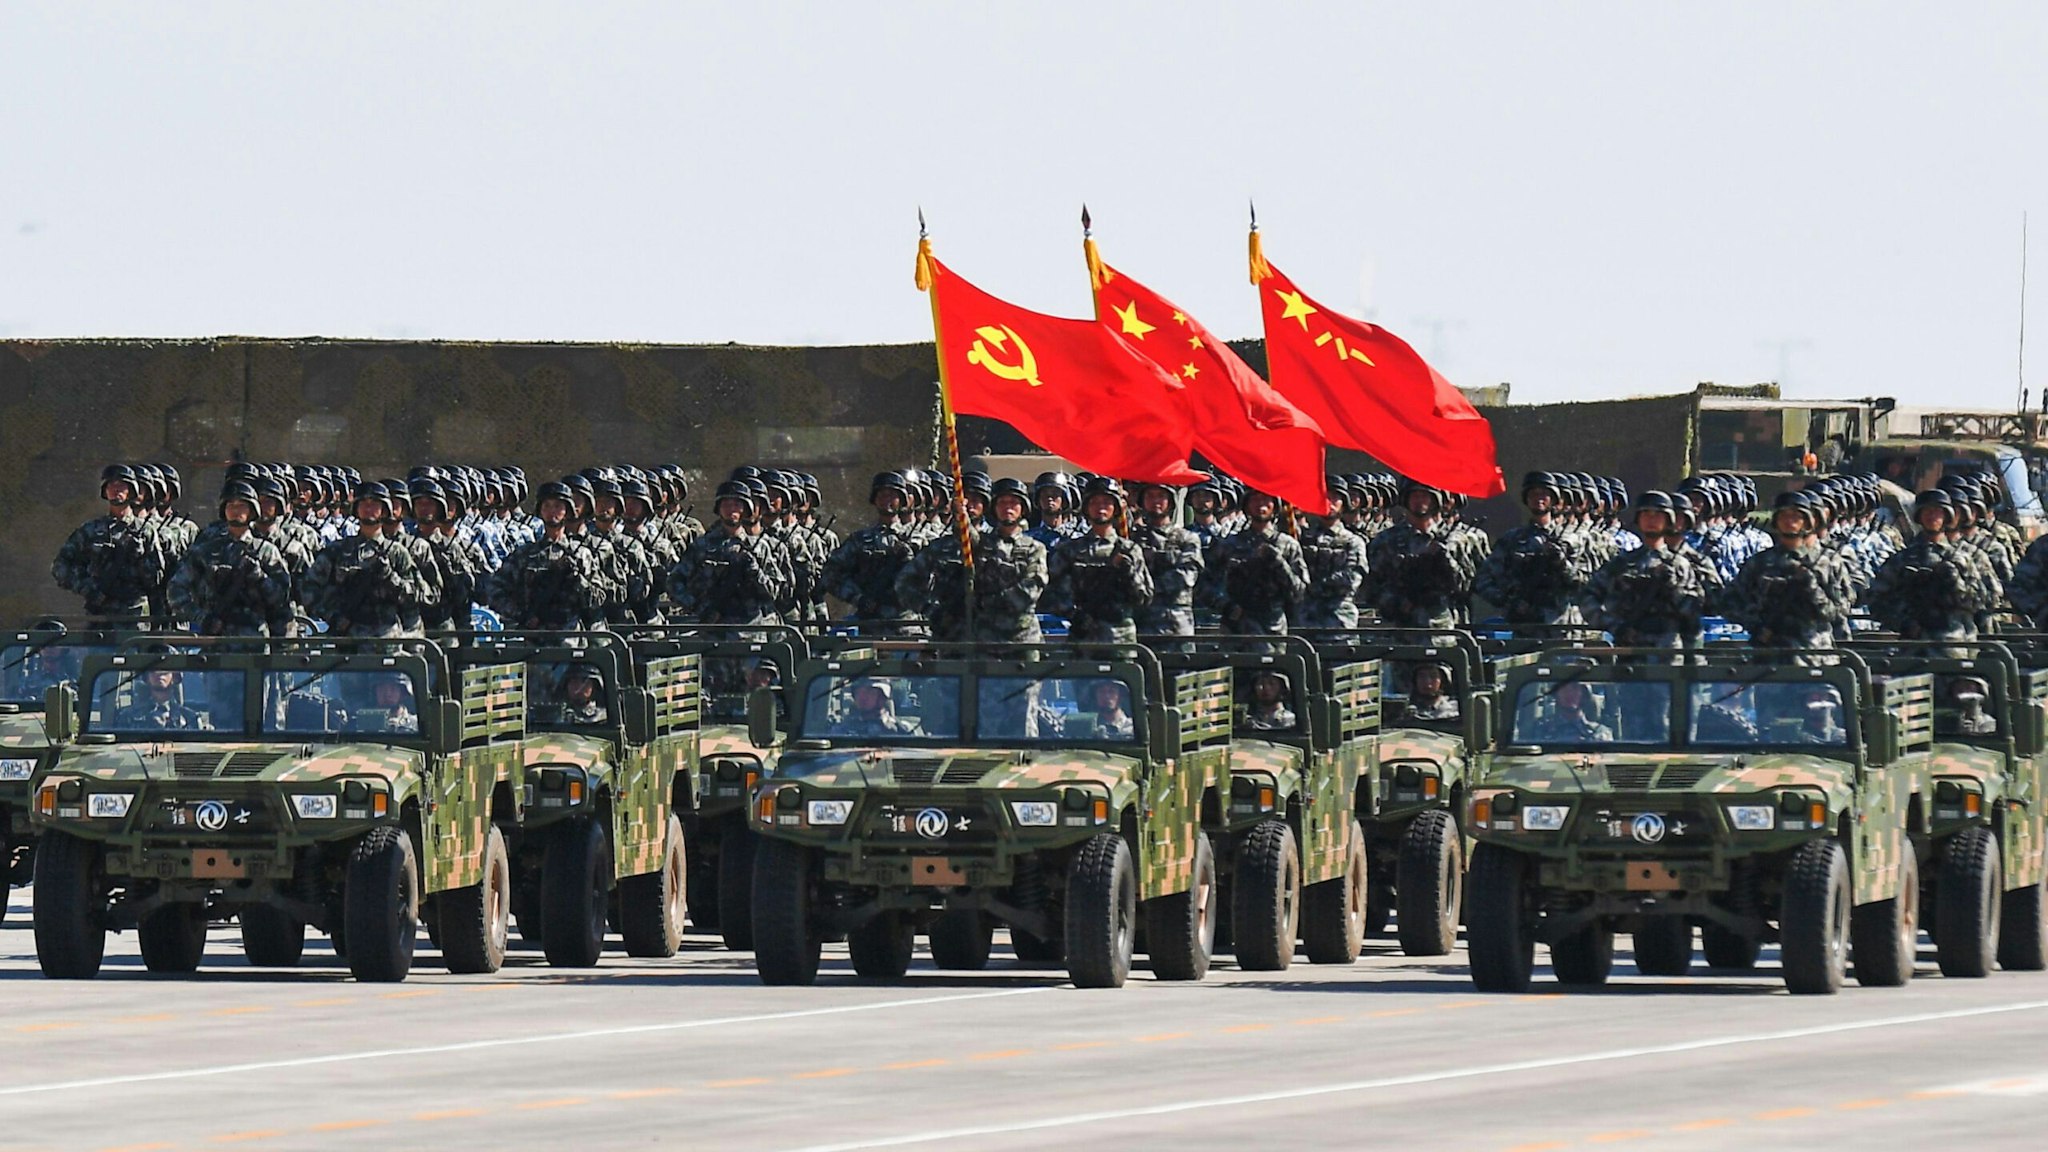 Chinese soldiers carry the flags of (L to R) the Communist Party, the state, and the People's Liberation Army during a military parade at the Zhurihe training base in China's northern Inner Mongolia region on July 30, 2017. China held a parade of its armed forces on July 30 to mark the 90th anniversary of the People's Liberation Army (PLA) in a display of military might.